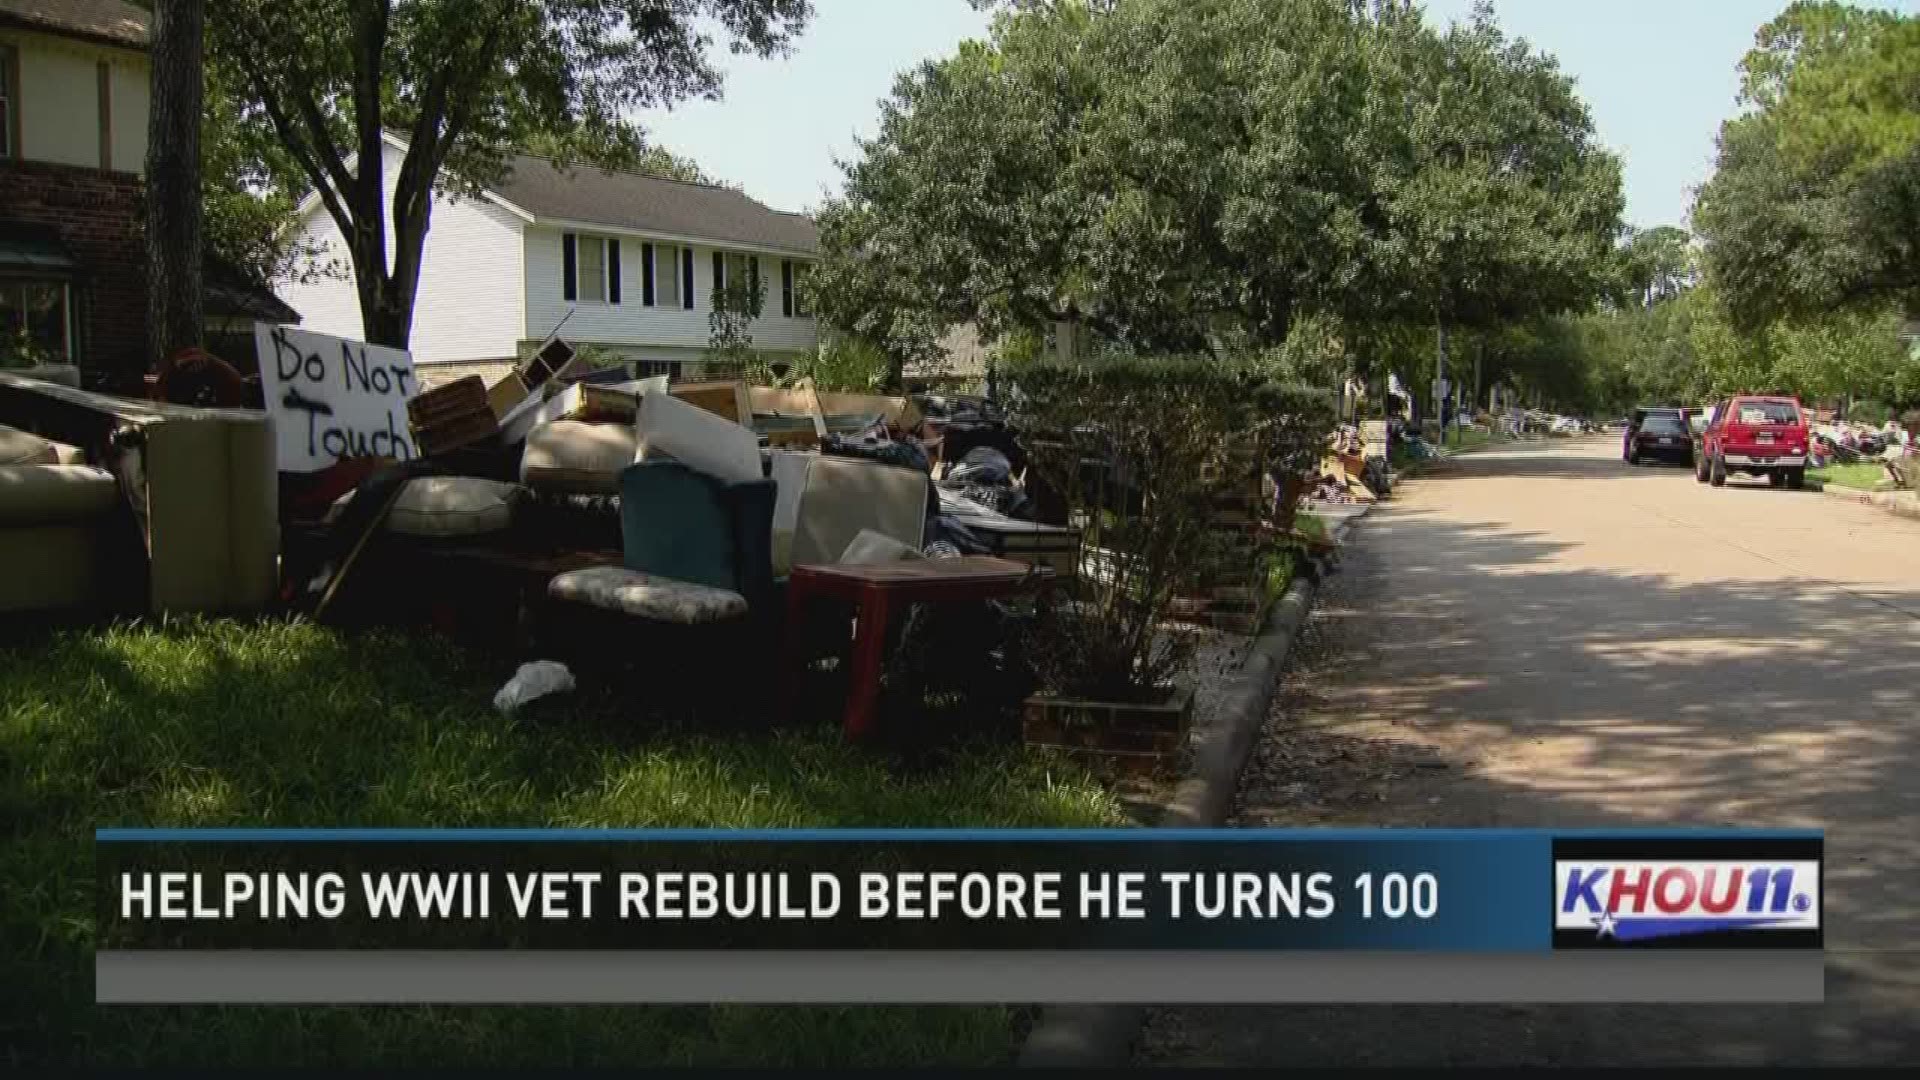 Volunteers have made it their mission to help a 99-year-old WWII veteran get back inside his flood-damaged home before his 100th birthday.